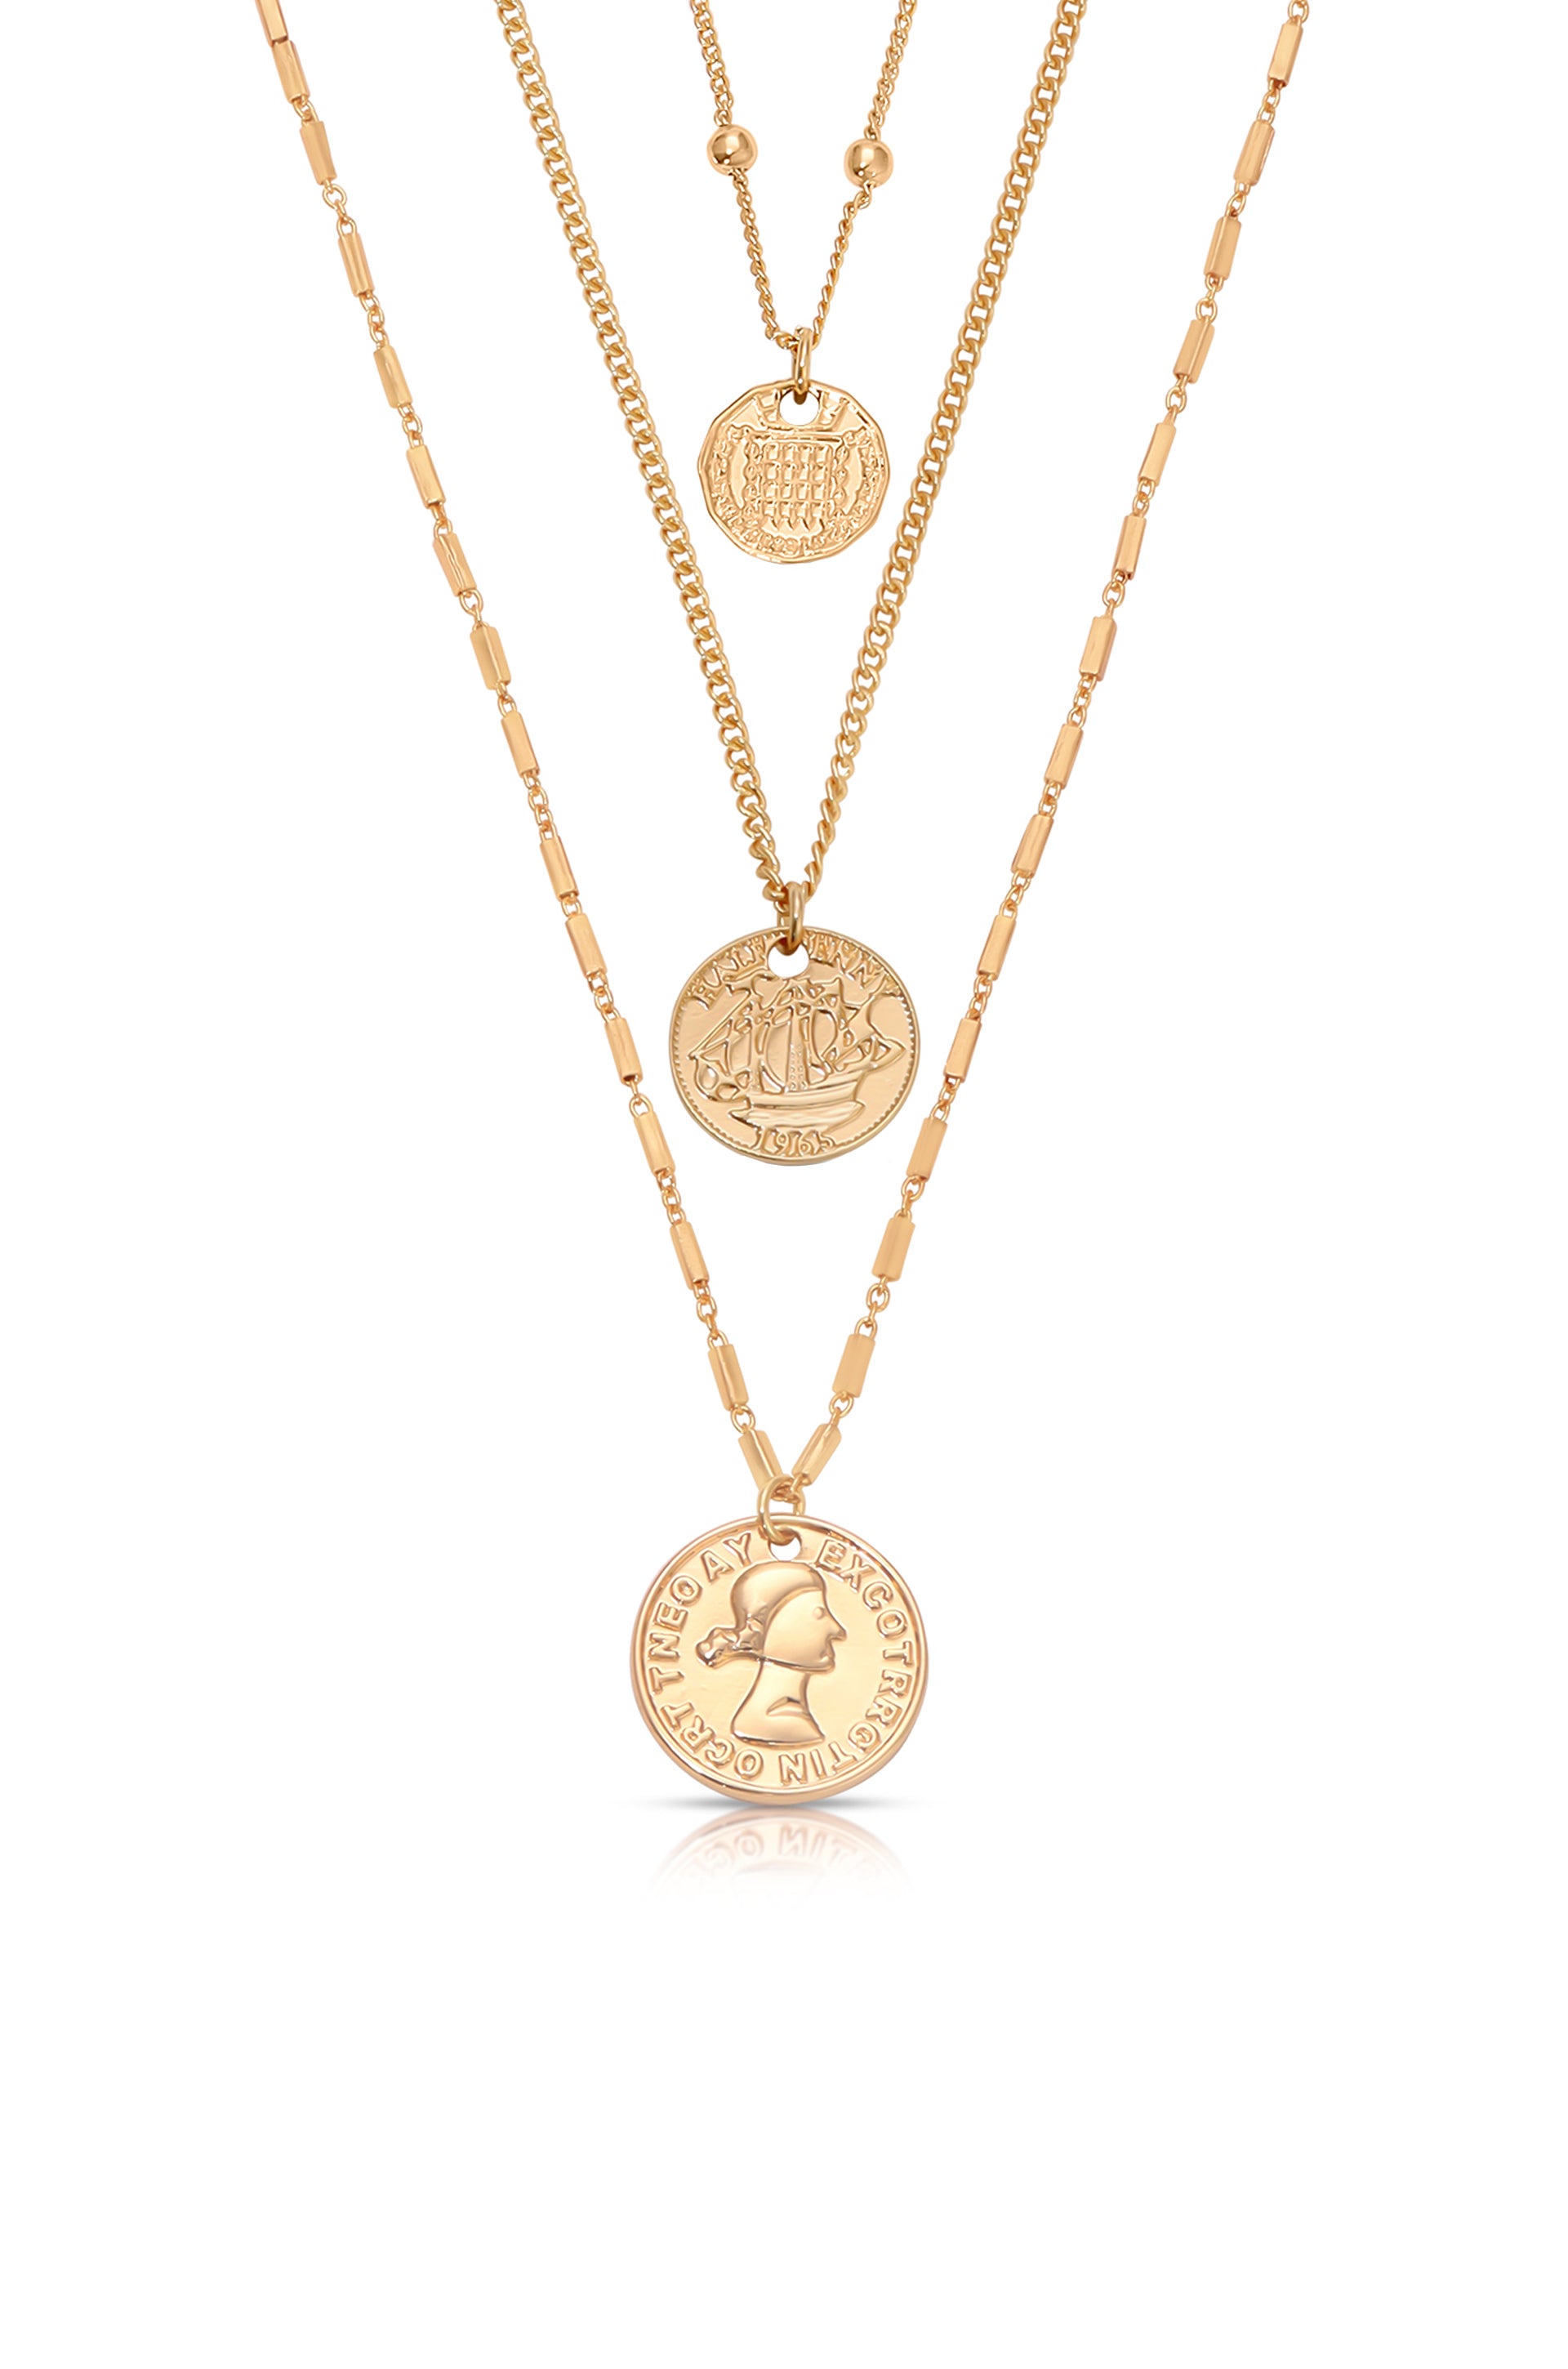 Three Coins Necklace Set in gold